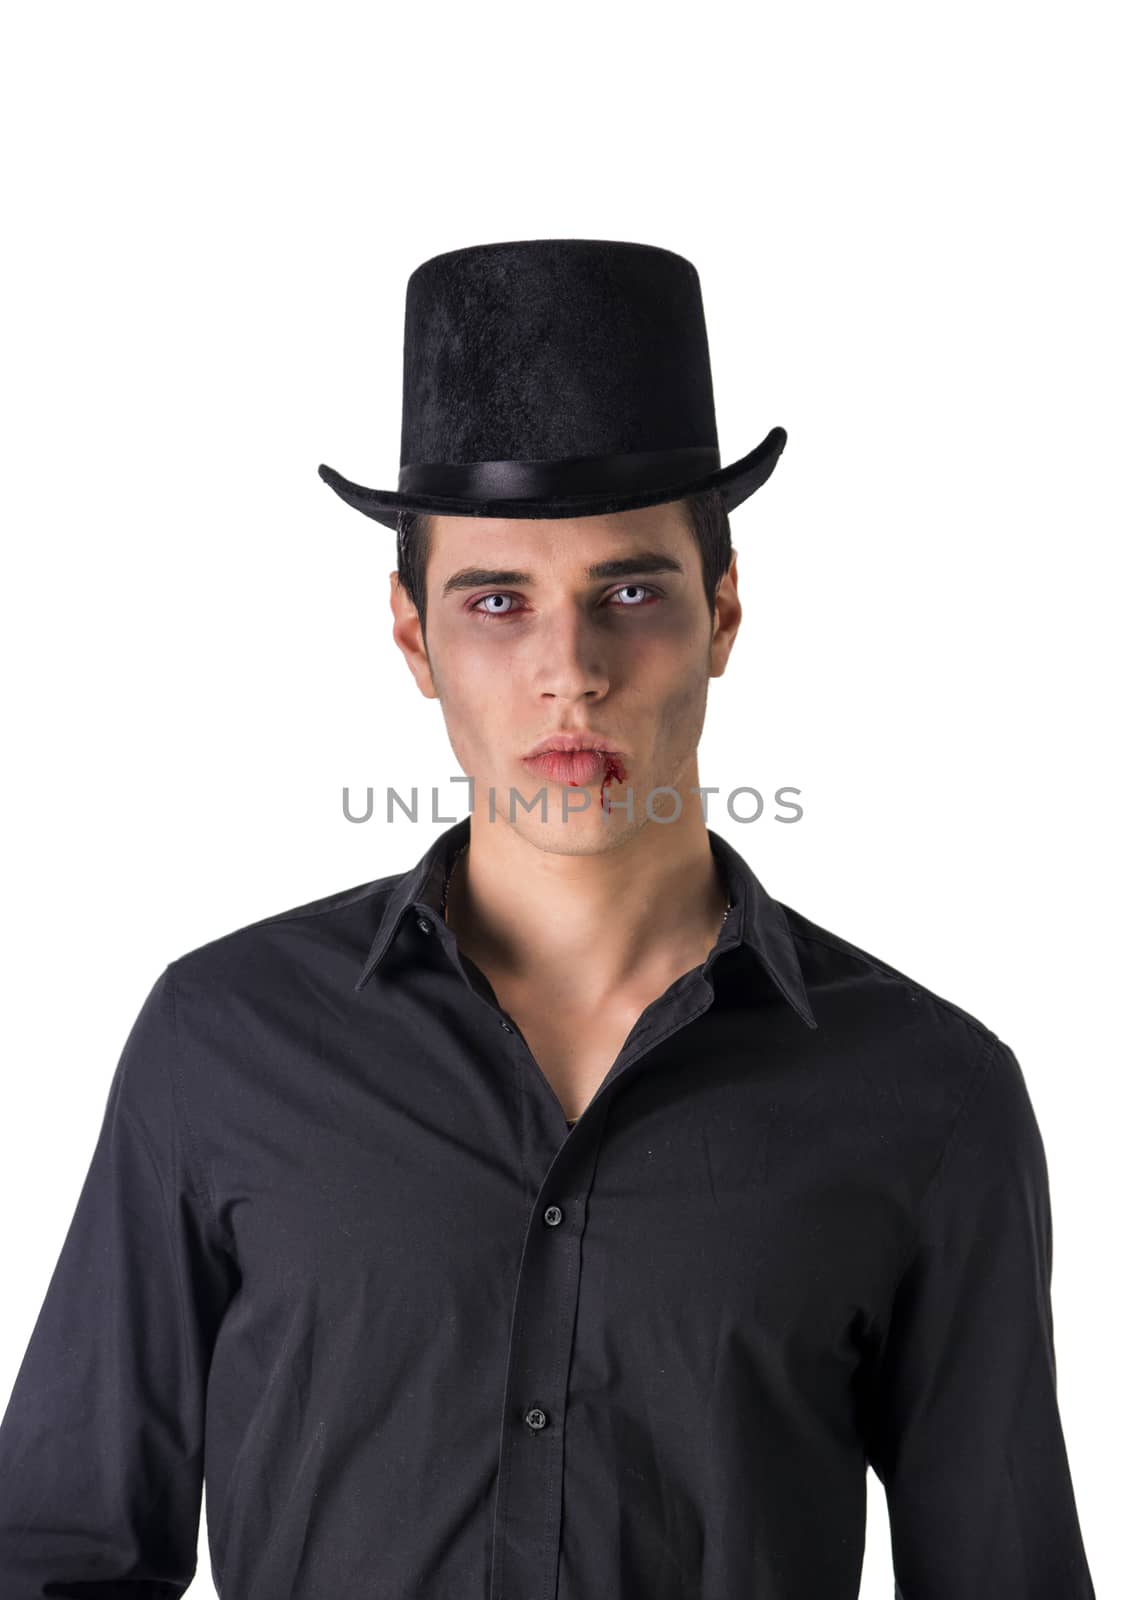 Portrait of a Young Vampire Man with High Hat by artofphoto